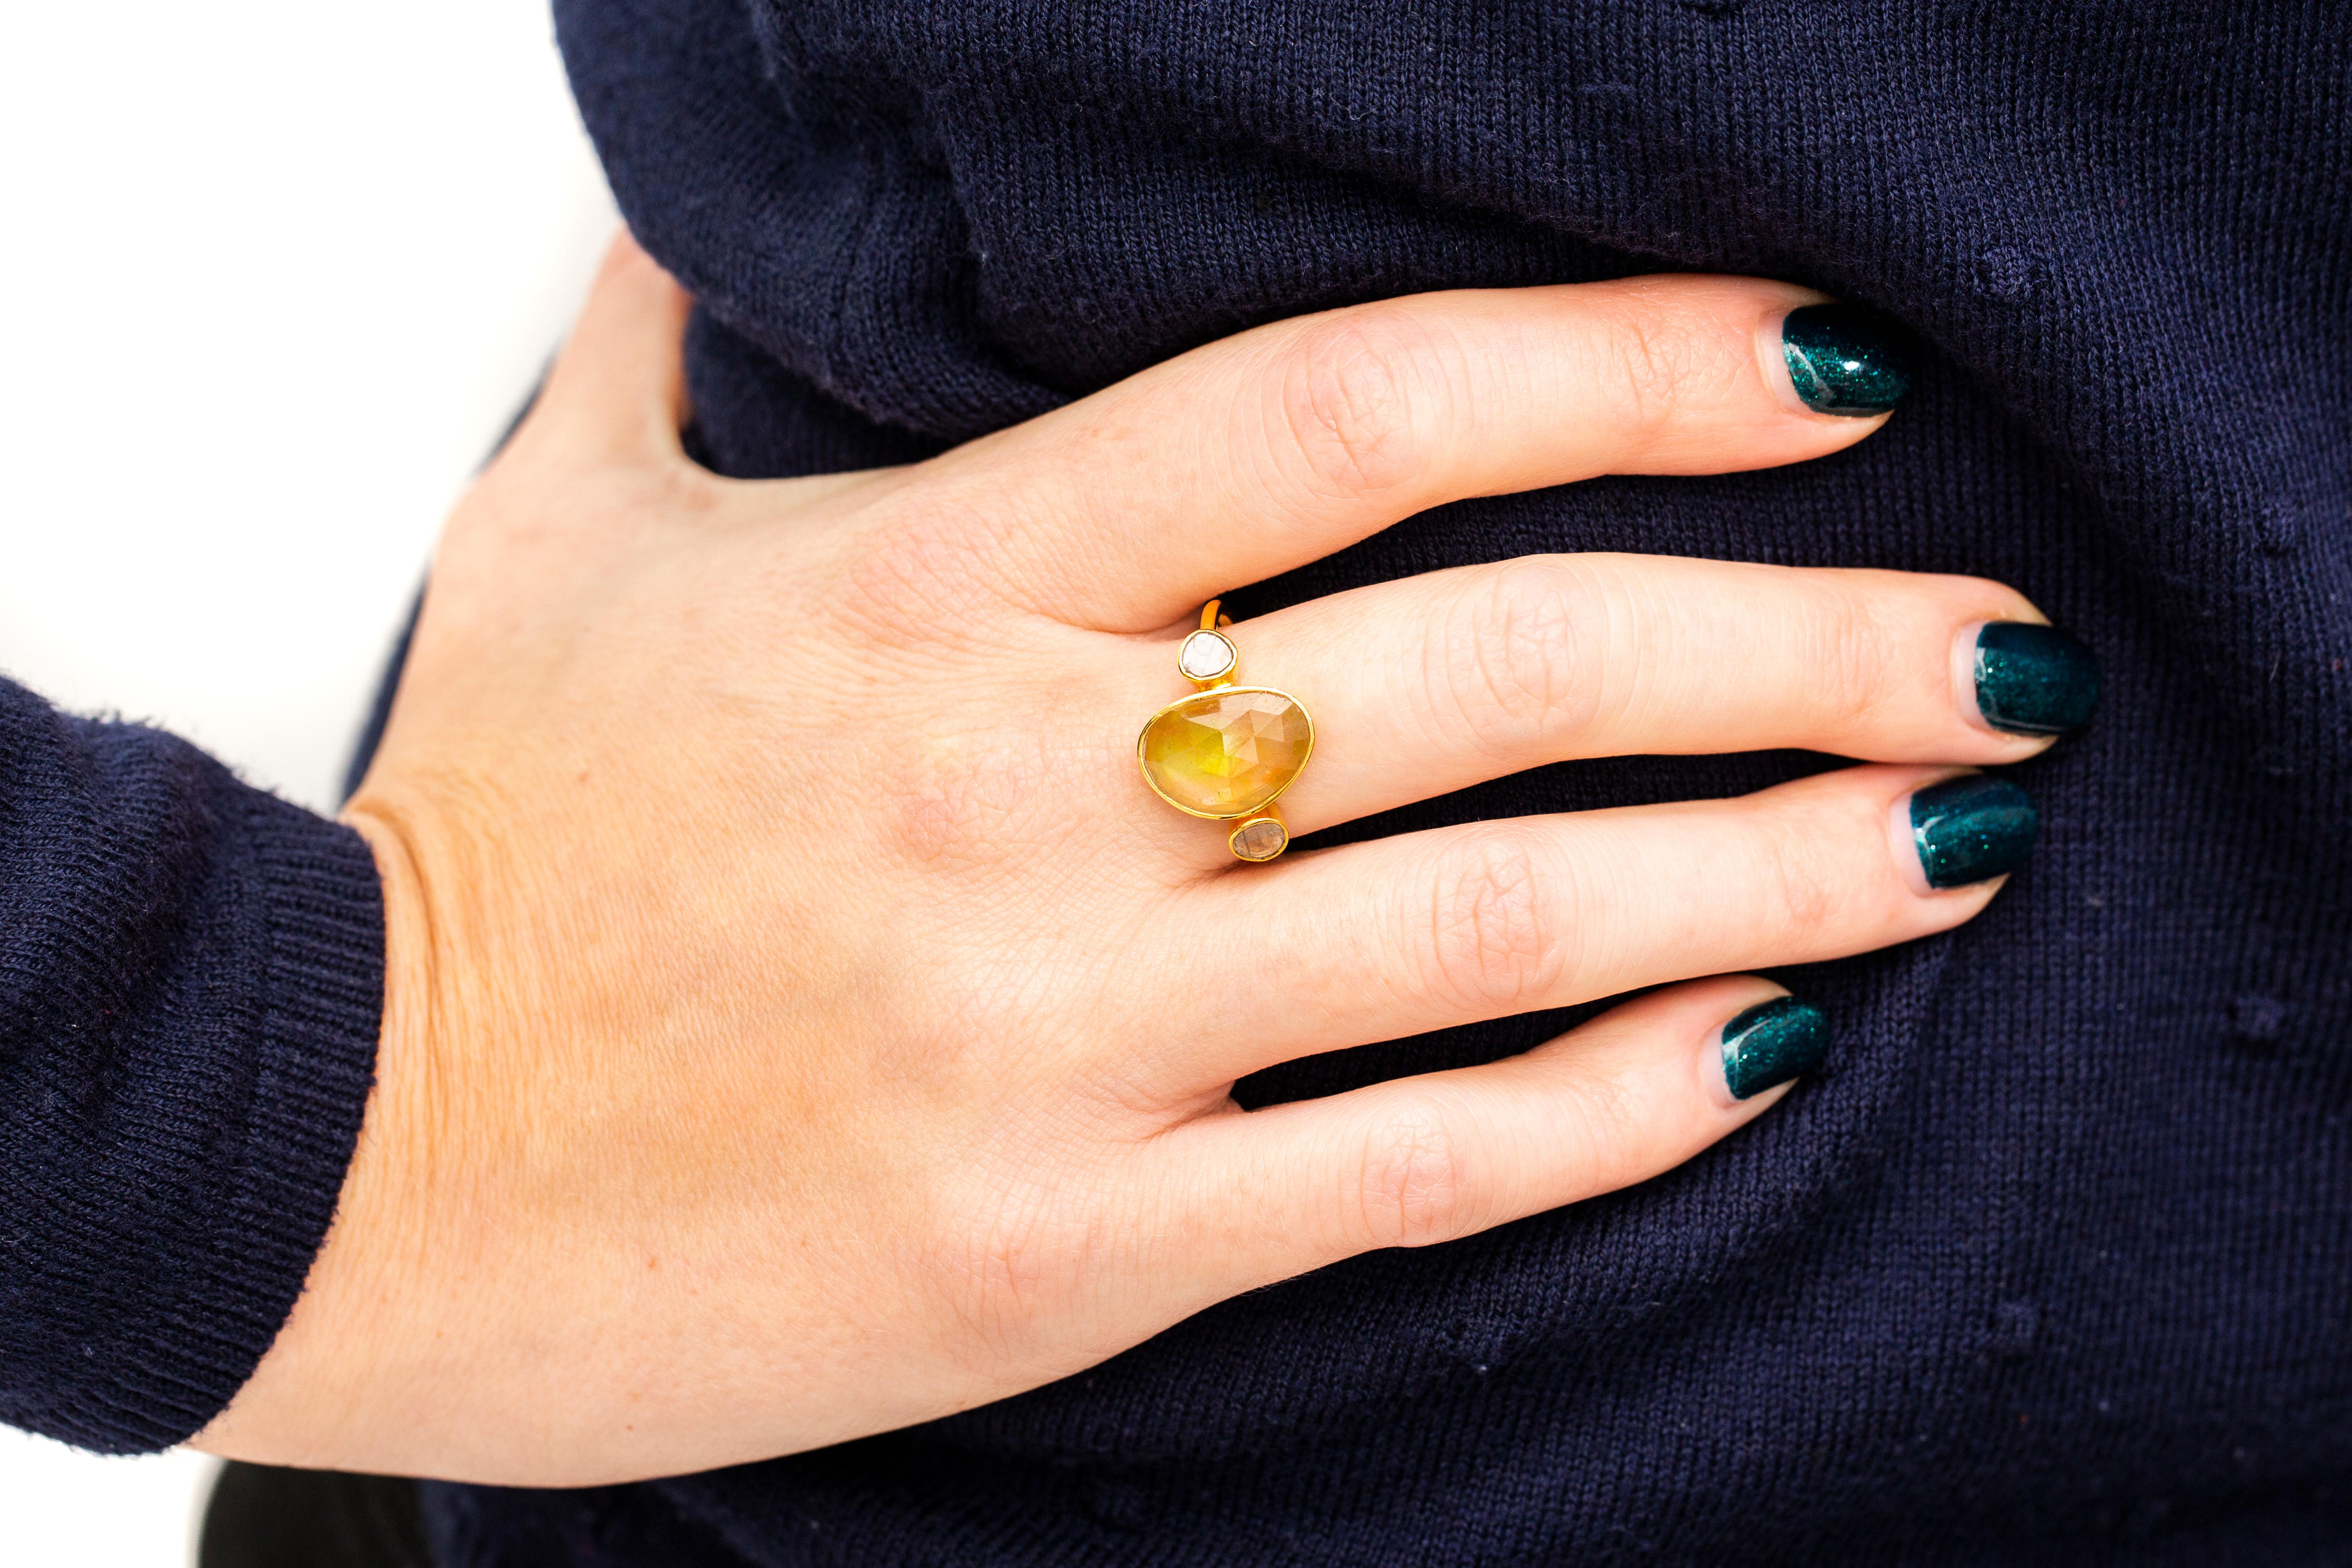 This Gorgeous 3.95 Carat Yellow Sapphire ring features 0.15 Carat in two Diamond slices one on each side set in 18 Karat Yellow Gold. This unique Yellow Sapphire and Diamond 3 stone Rose Cut ring is perfect for any occasion night or day. Each piece